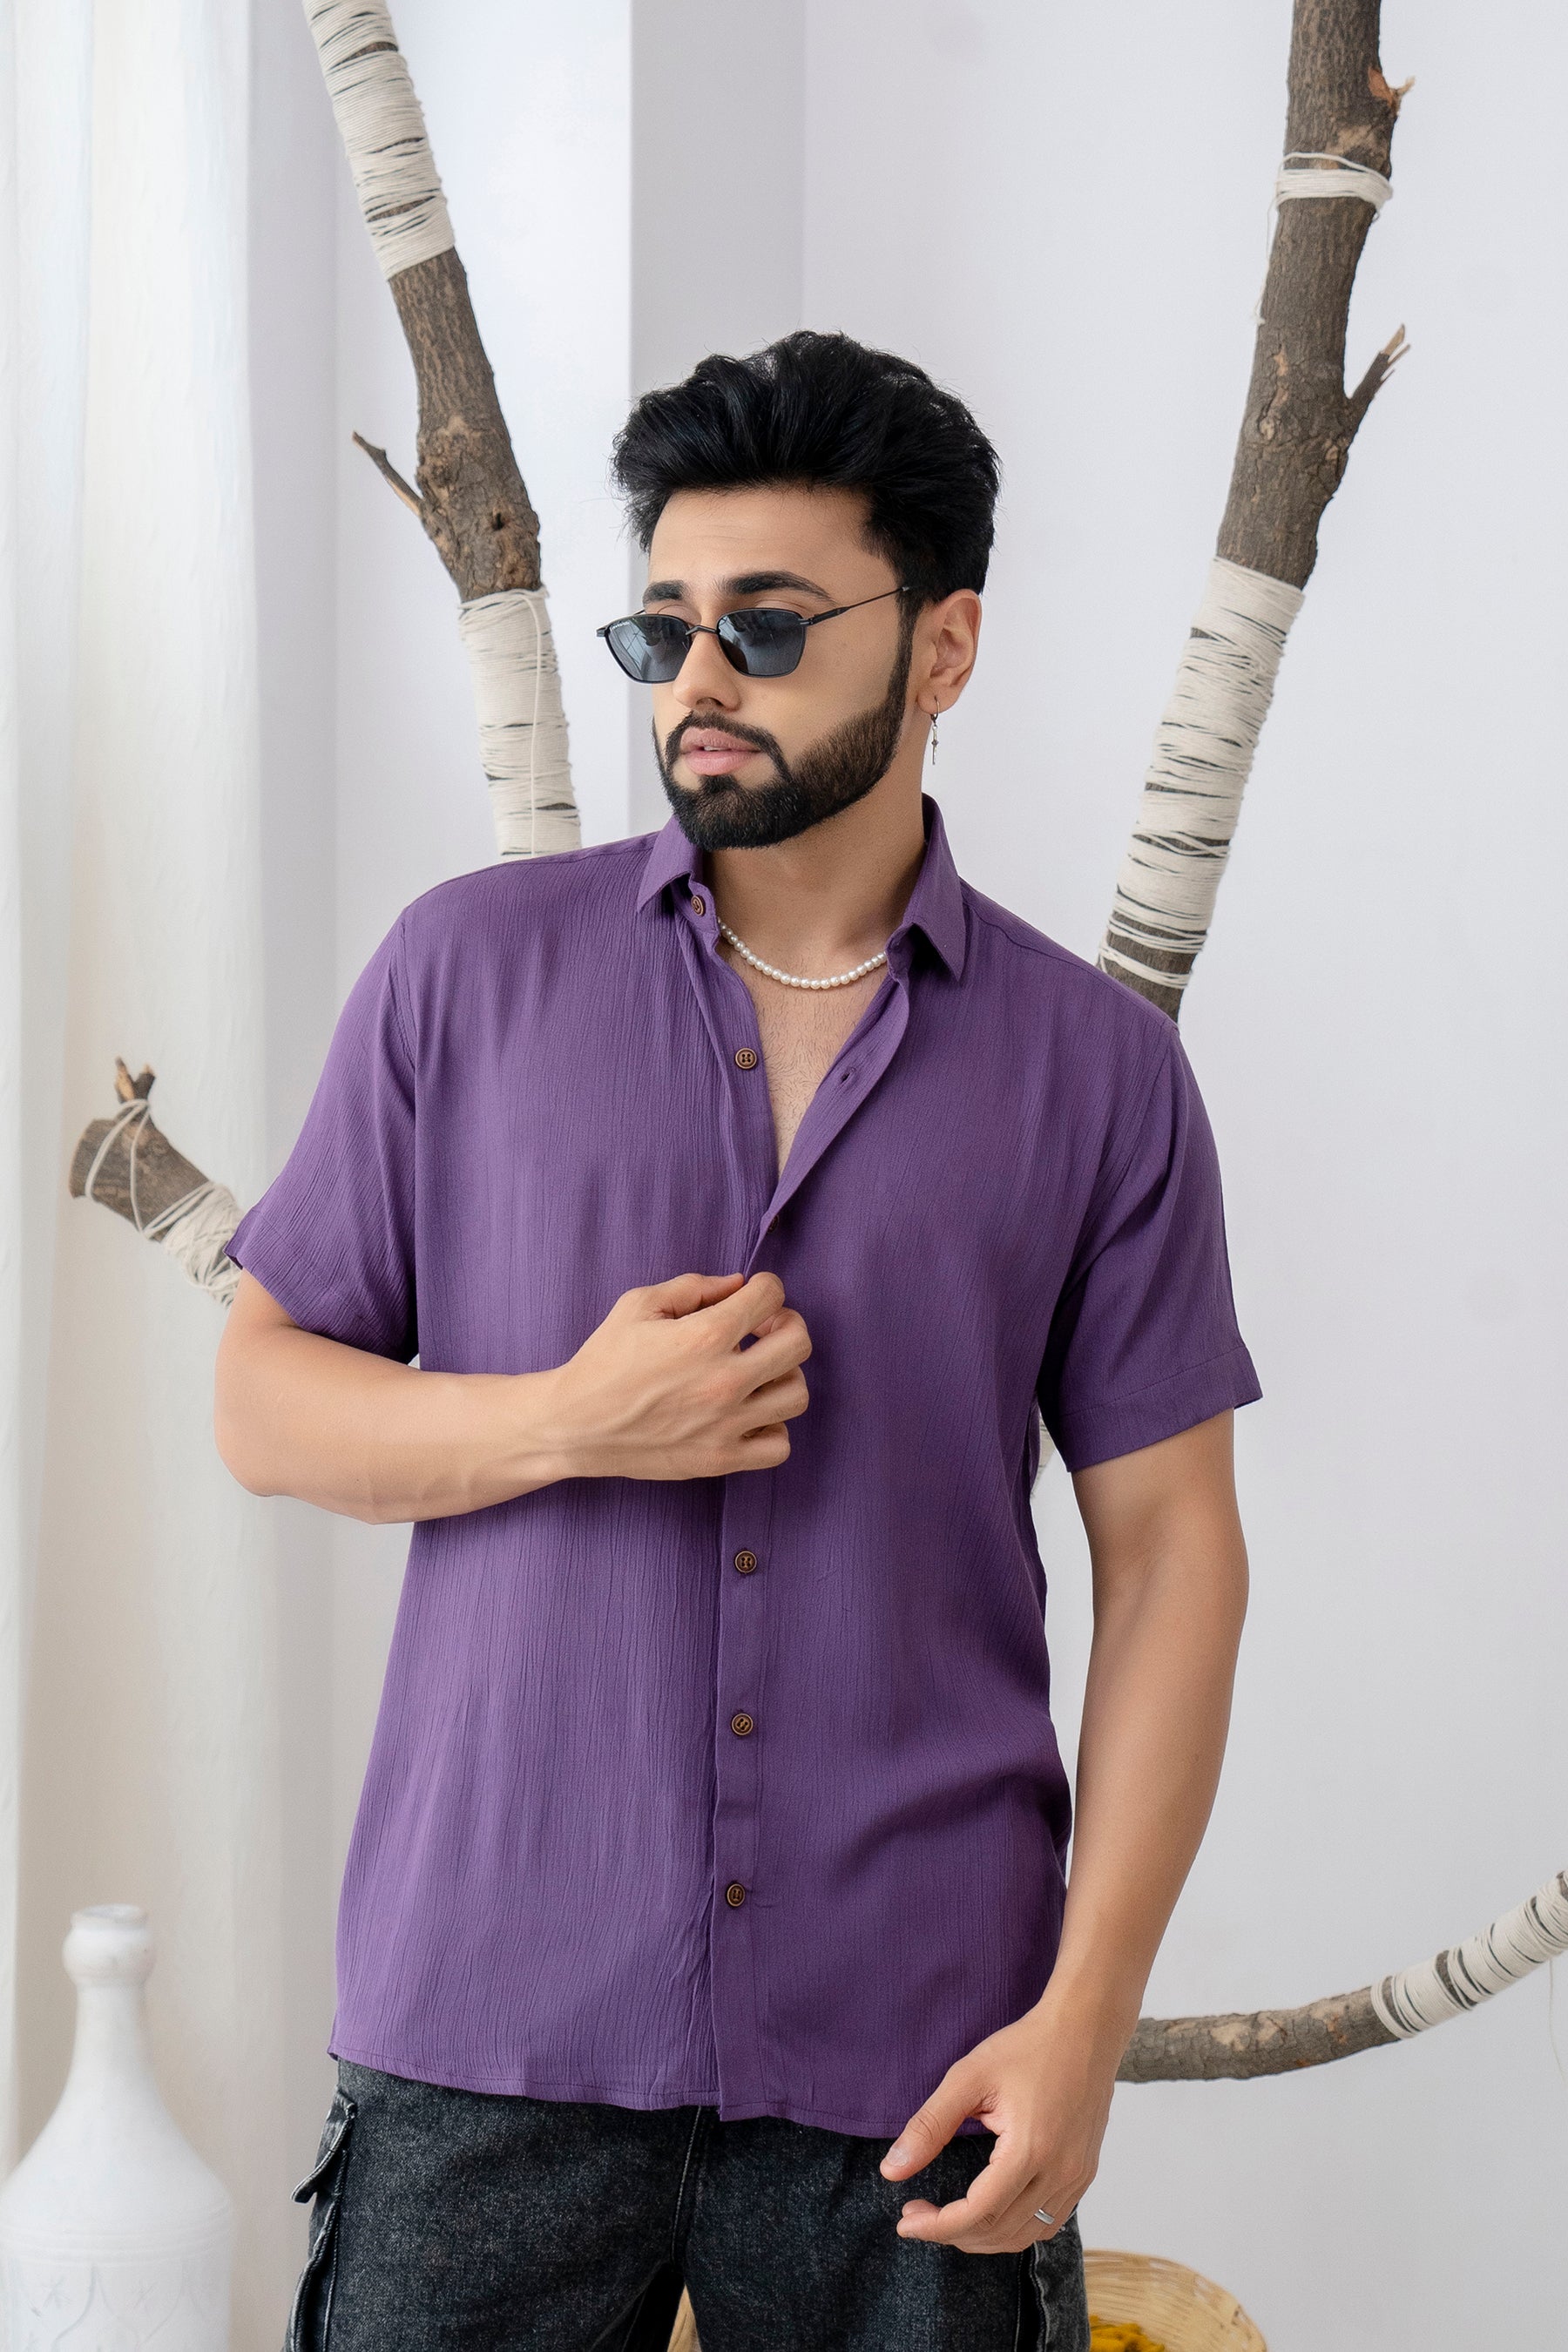 Firangi Yarn Relaxed Fit Solid Super Flowy Re-engineered Cotton- Half Sleeves Party Shirt Jamun Purple